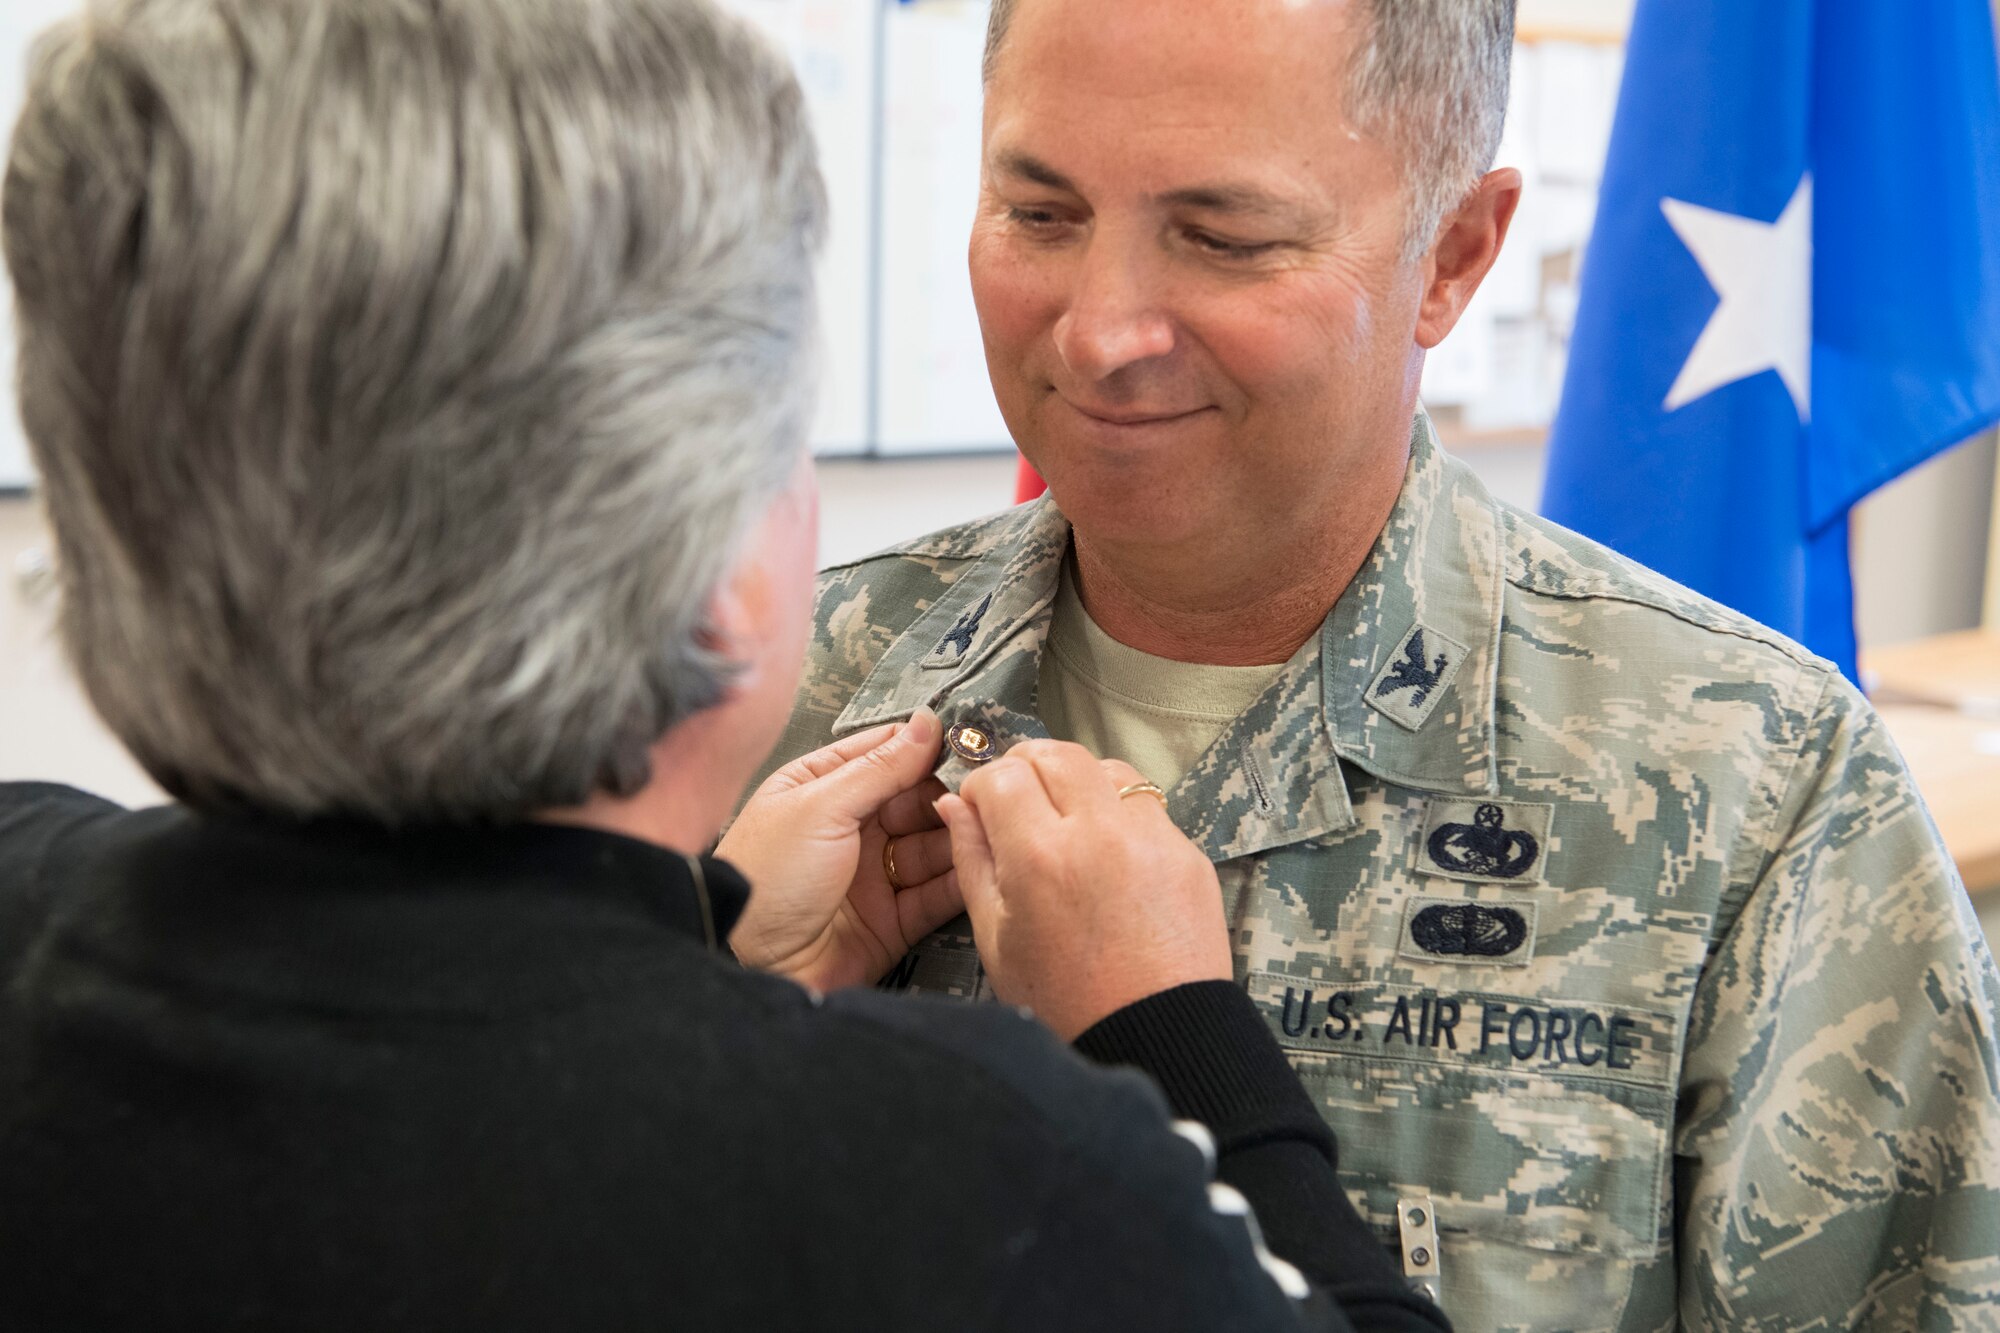 Mrs. Shelia Huffman pins the Air Force retirement lapel pin to Col. Randy C. Huffman’s uniform upon the posting of his retirement order March 3, 2018, at McLaughlin Air National Guard Base, Charleston, W.Va. Huffman, the former 130th Airlift Wing Vice Commander, bid farewell to his fellow Airmen and was celebrated for his 37-year career in the Air Force. (U.S. Air National Guard photo by Tech Sgt. Eugene Crist)